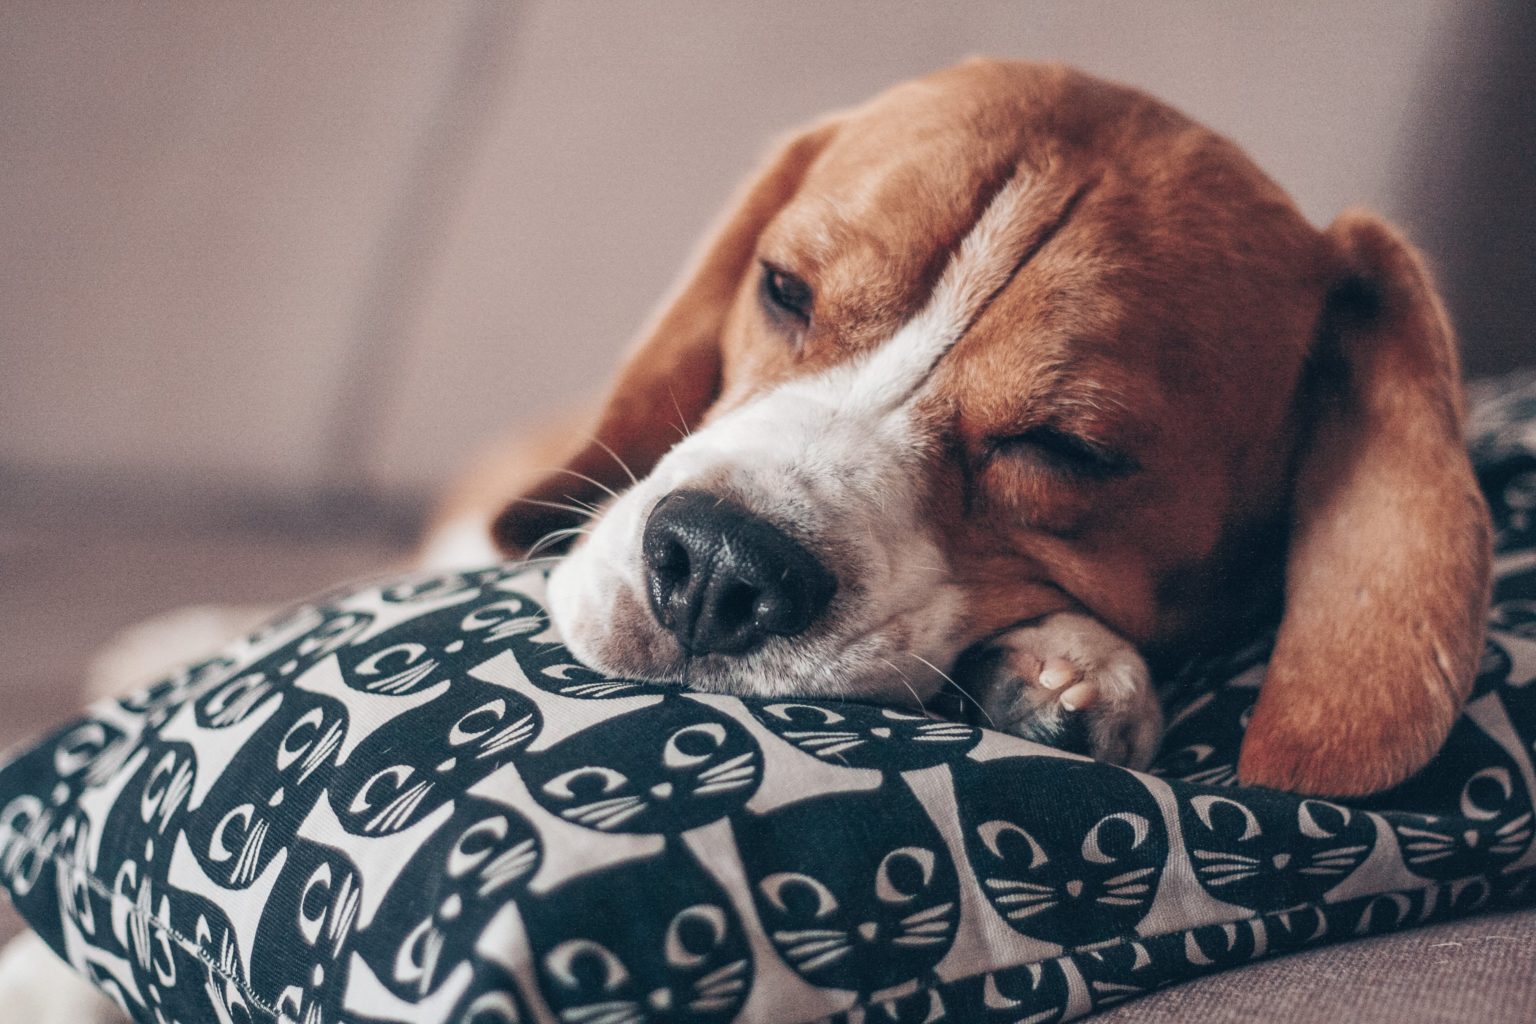 Beagle asleep after a long day out